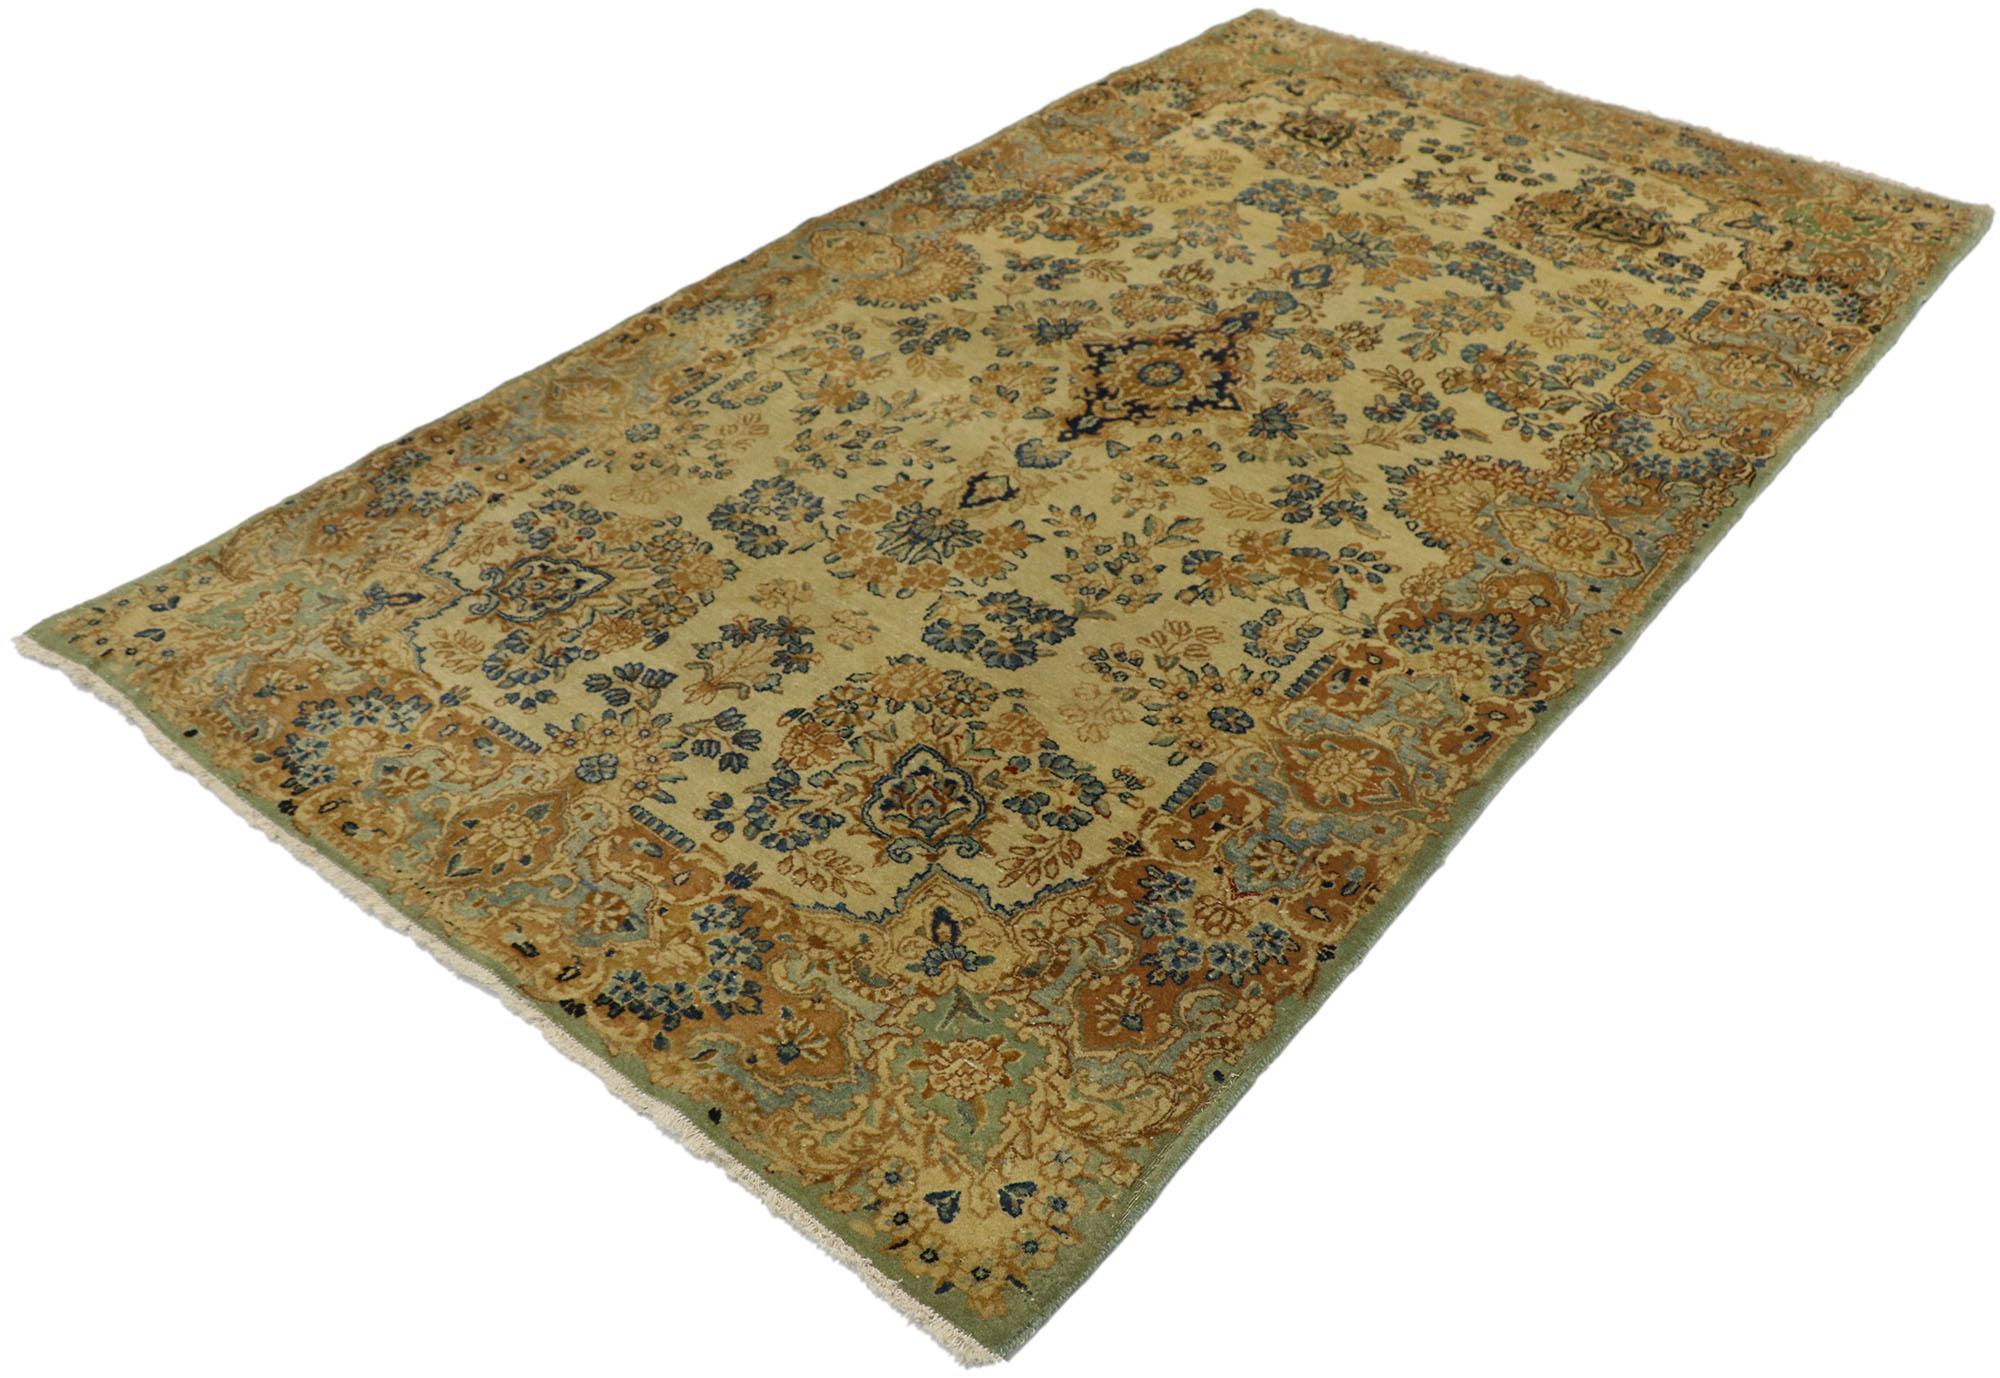 72996, vintage Persian Kirman rug, Persian Kerman rug. With an impressive array of realistic floral elements and a refined color palette, this hand knotted wool vintage Persian Kerman rug charms with ease and beautifully embodies shabby chic rustic